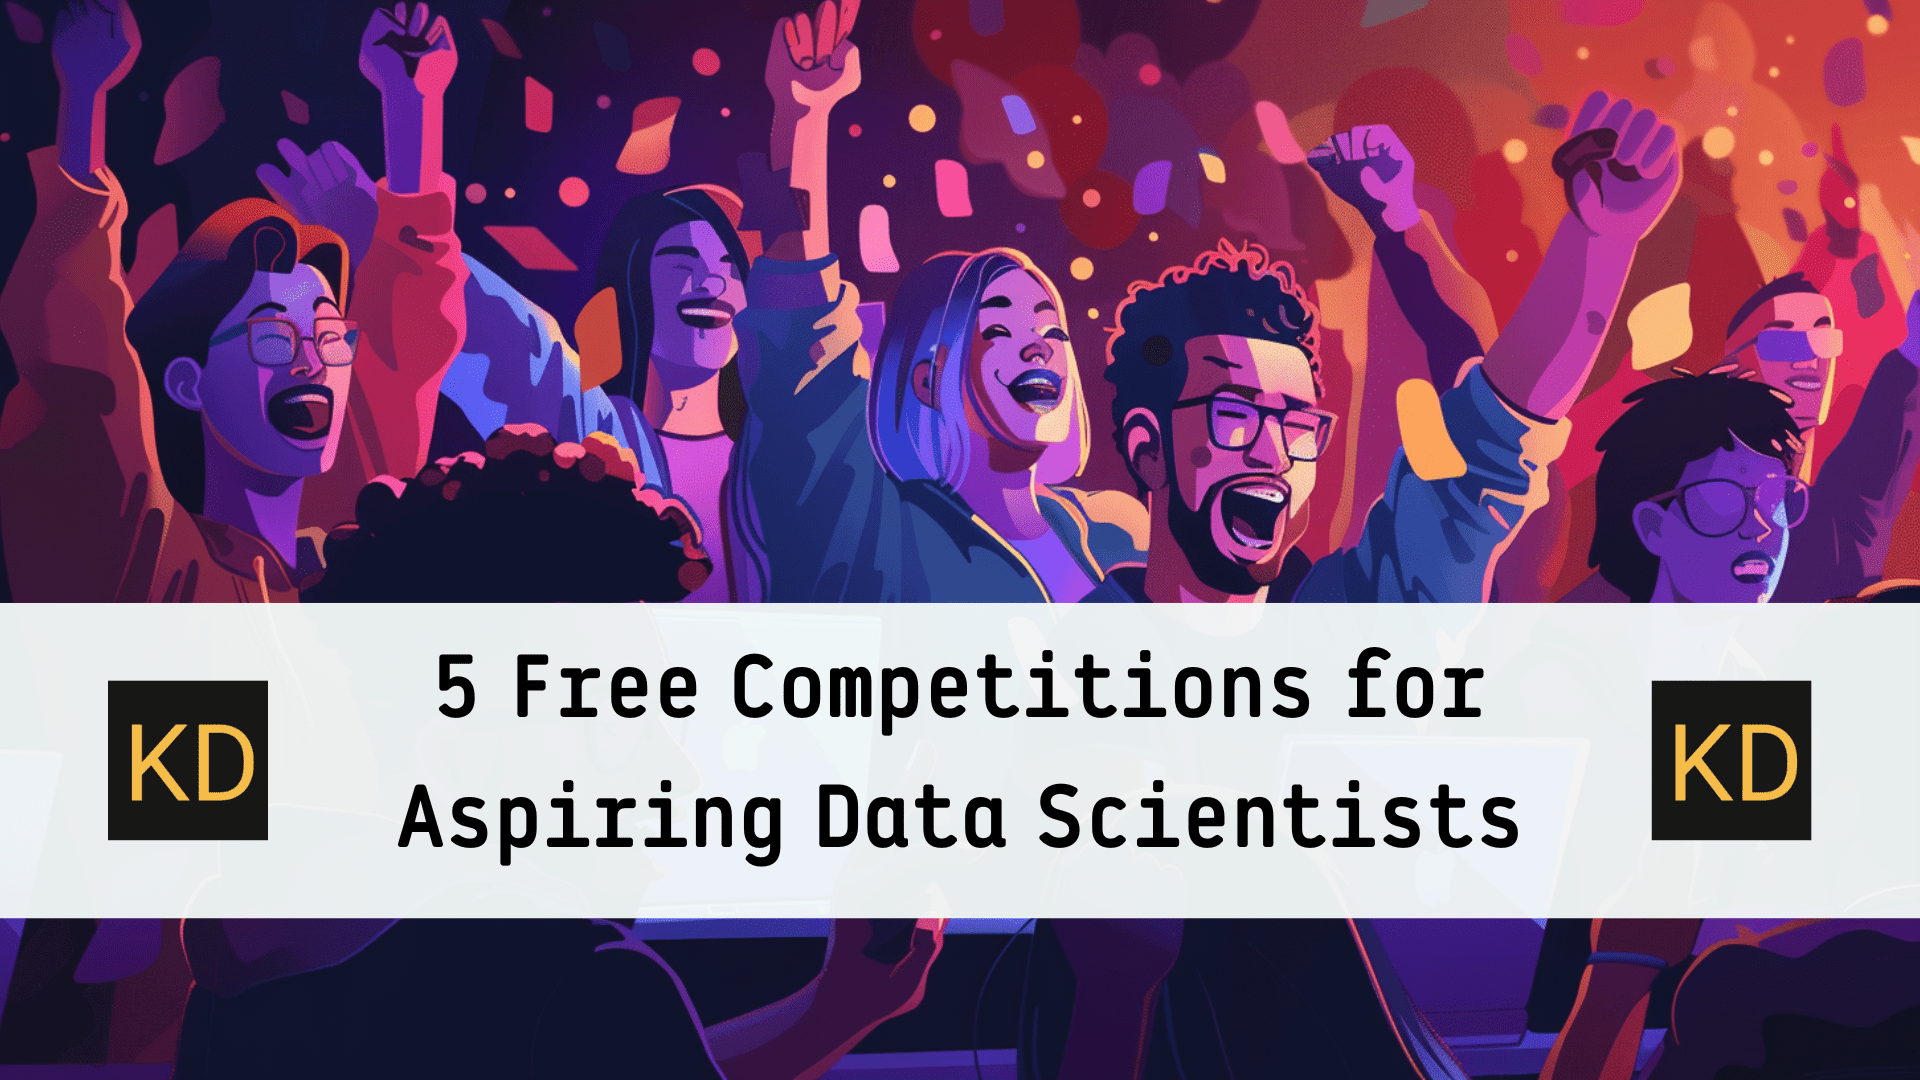 5 Free Quizzes for Aspiring Data Scientists